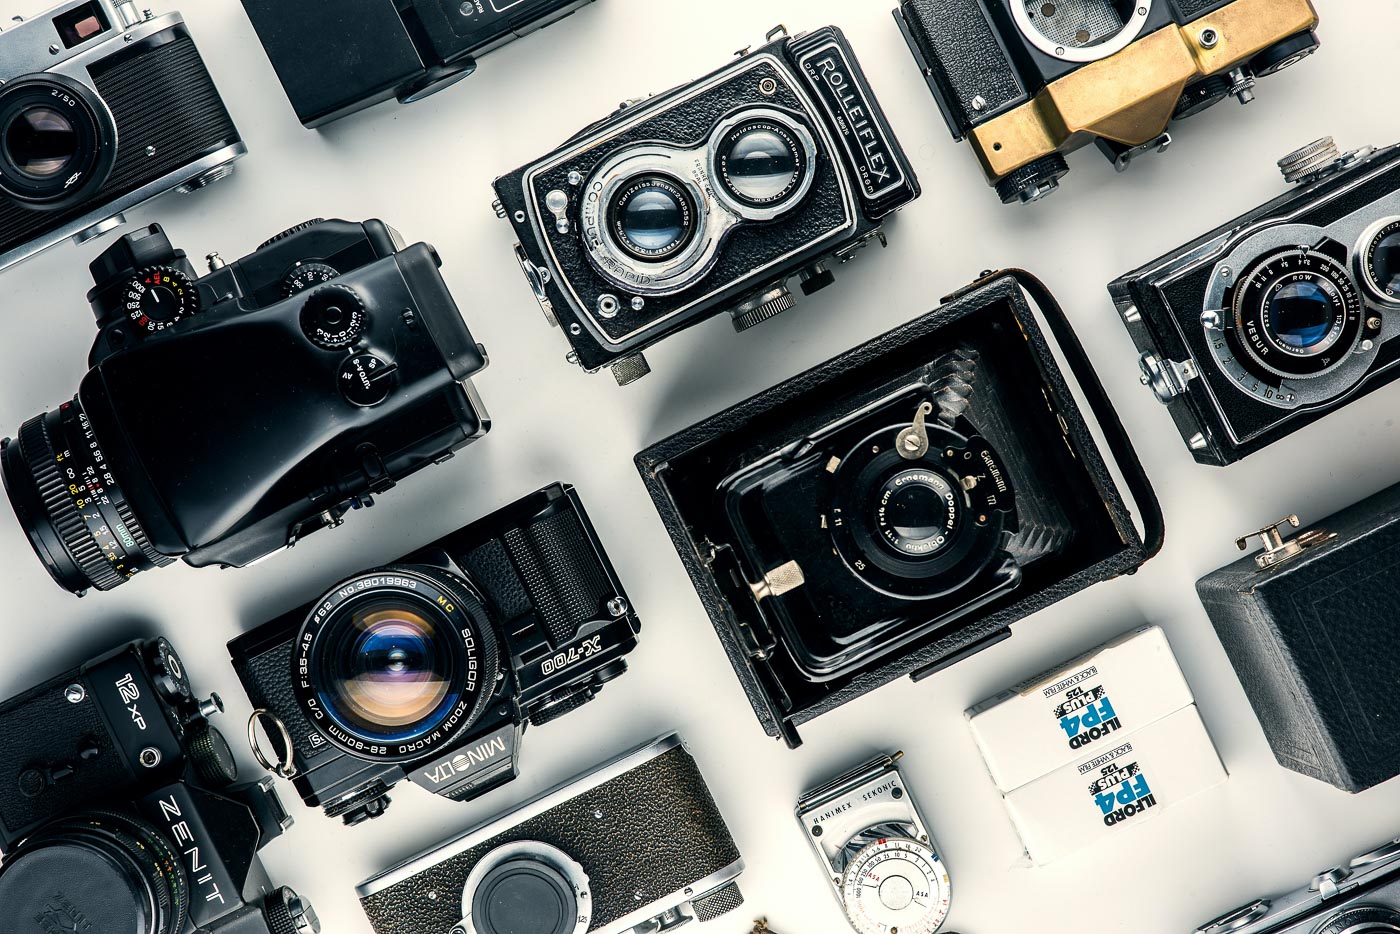 Different types of cameras and images for projects